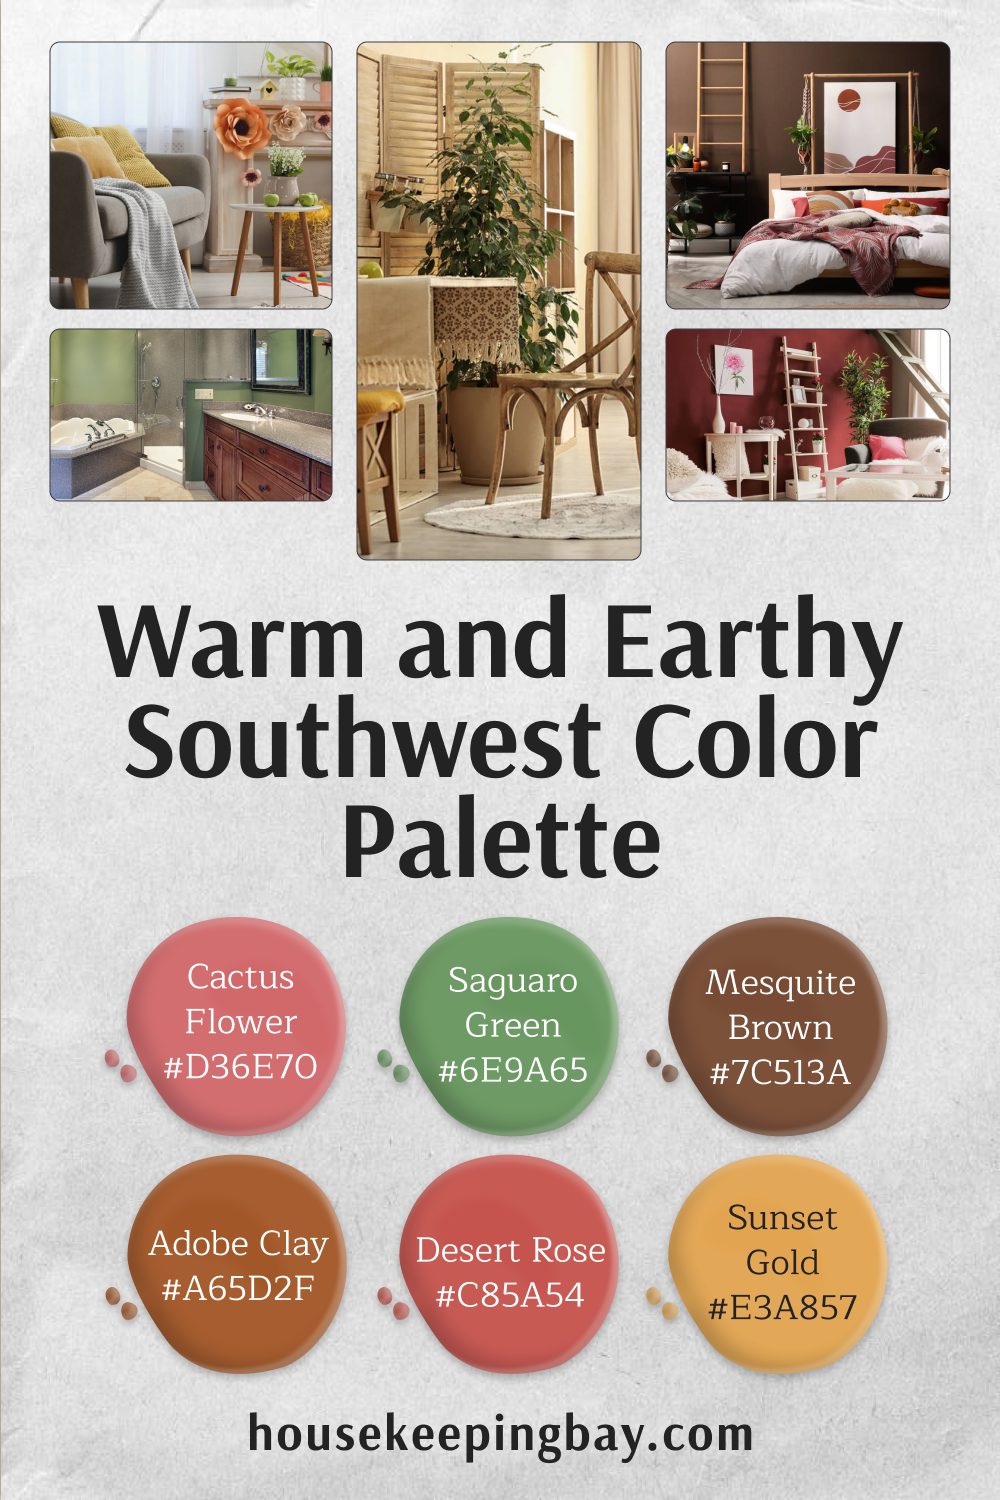 Warm and Earthy Southwest Color Palette